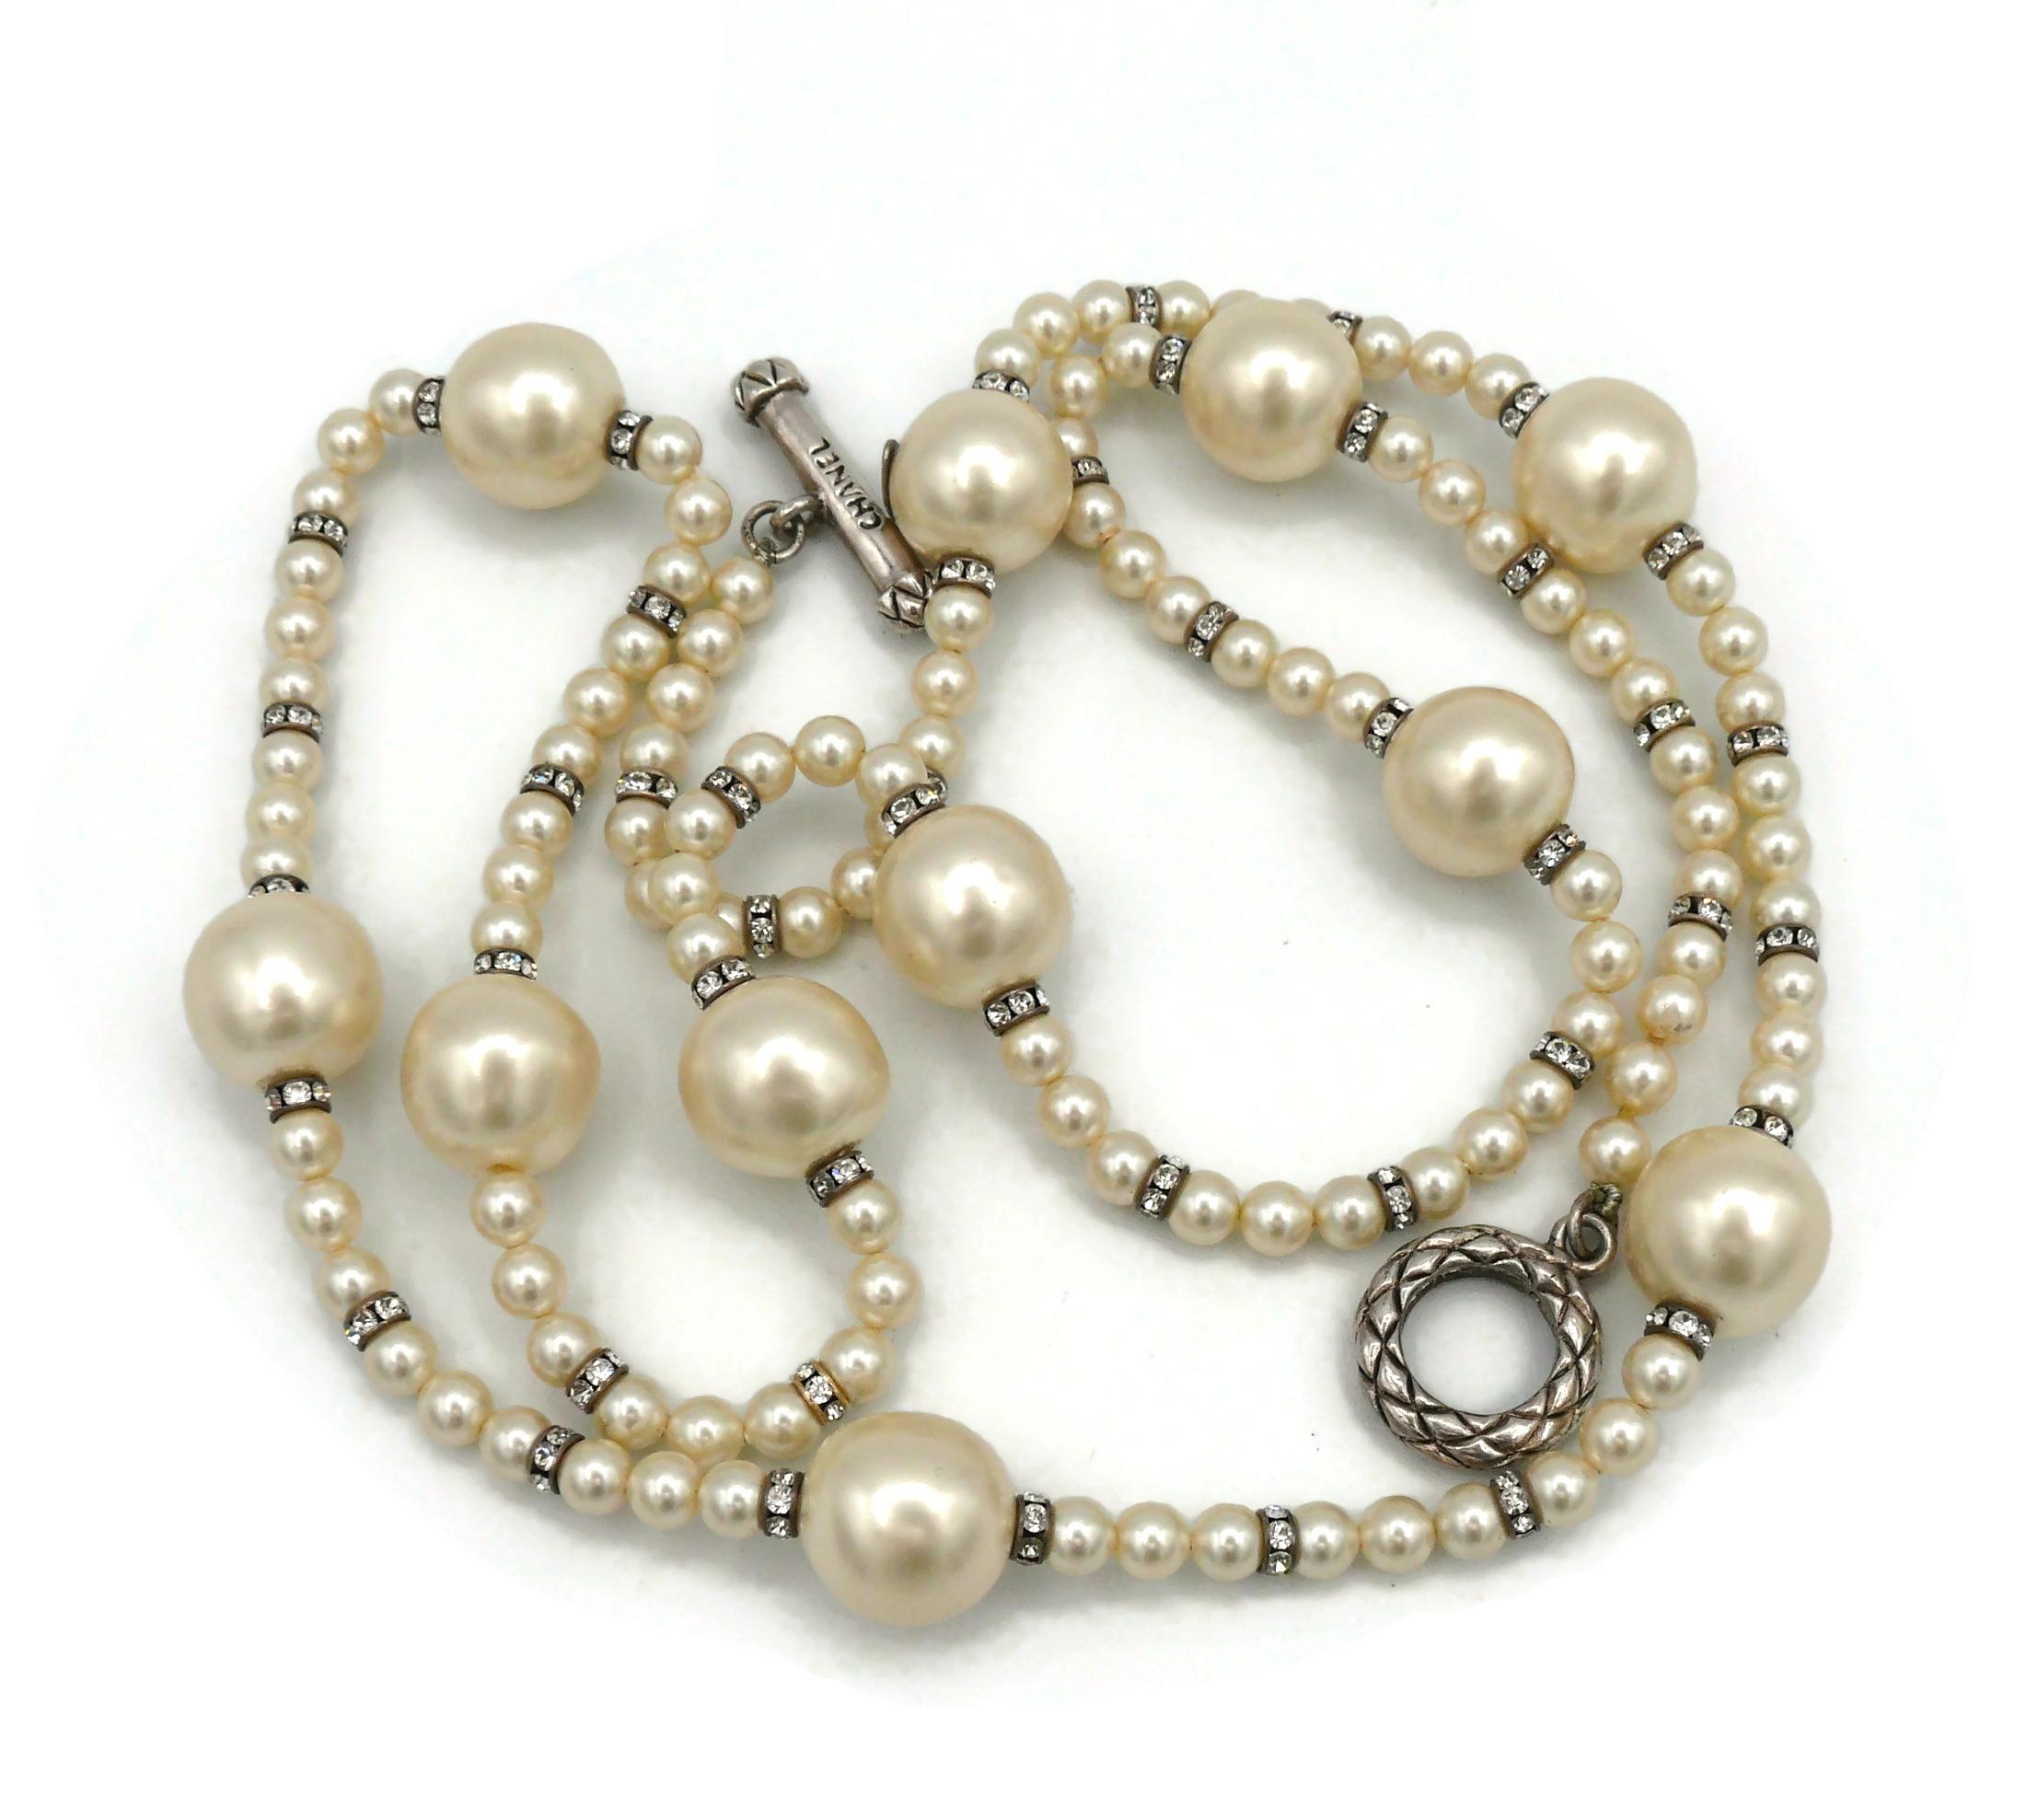 CHANEL by KARL LAGERFELD Vintage Faux Pearl and Crystal Necklace, Fall 1993 In Good Condition For Sale In Nice, FR